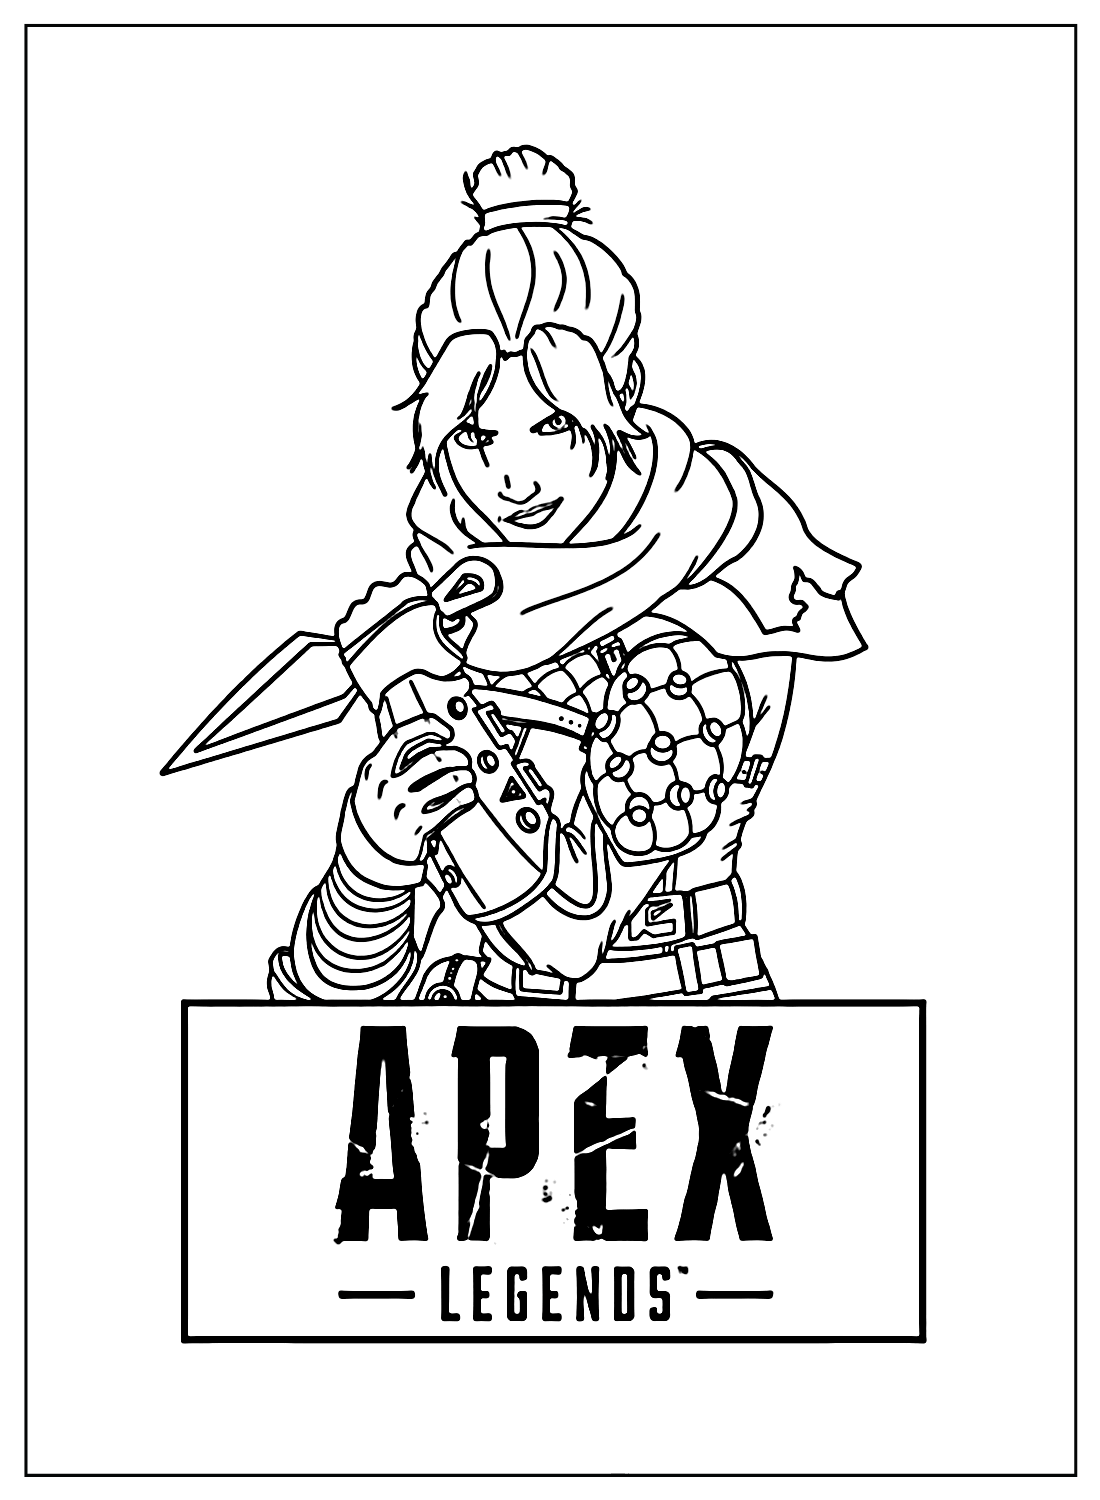 Free Coloirng Page Apex Legends from Apex Legends